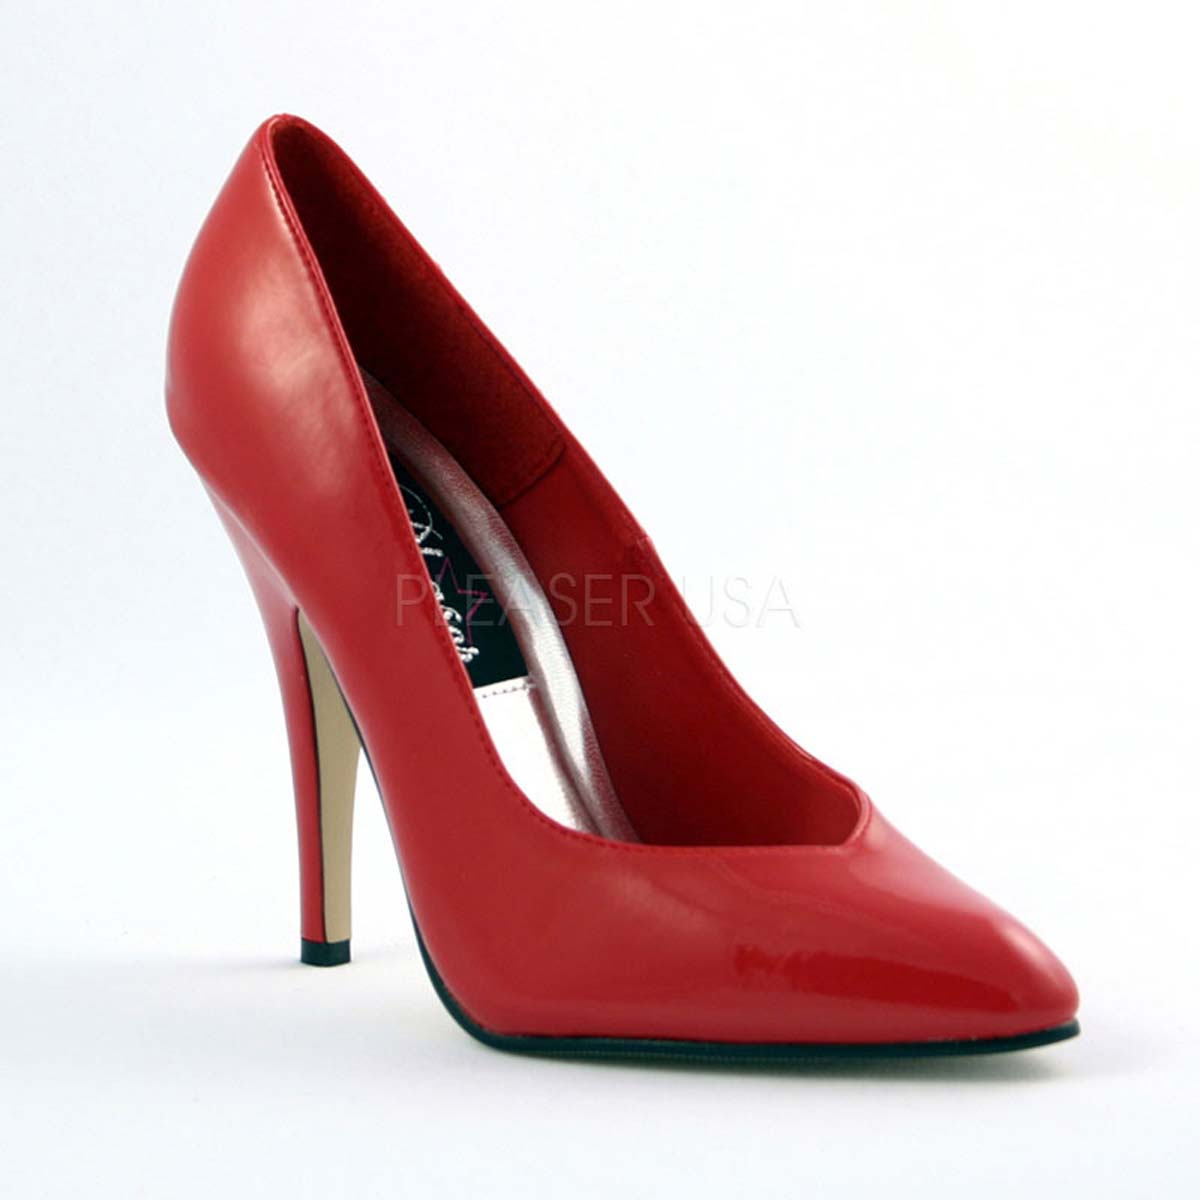 Pleaser 8220 Seduce 420v Red Patent In Sexy Heels And Platforms 5195 8794